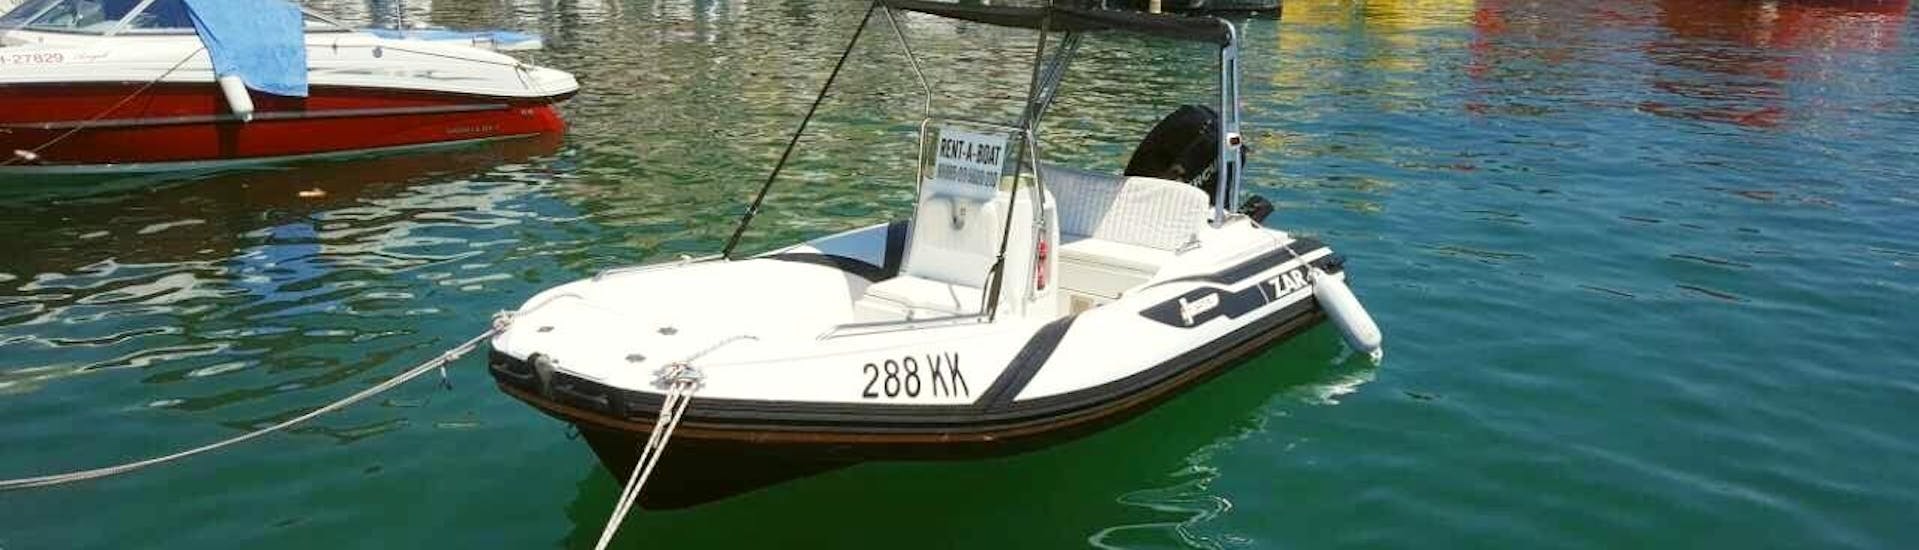 Boat available for a motorboat rental for 5 people in Krk with Rent a Boat Phoenix.